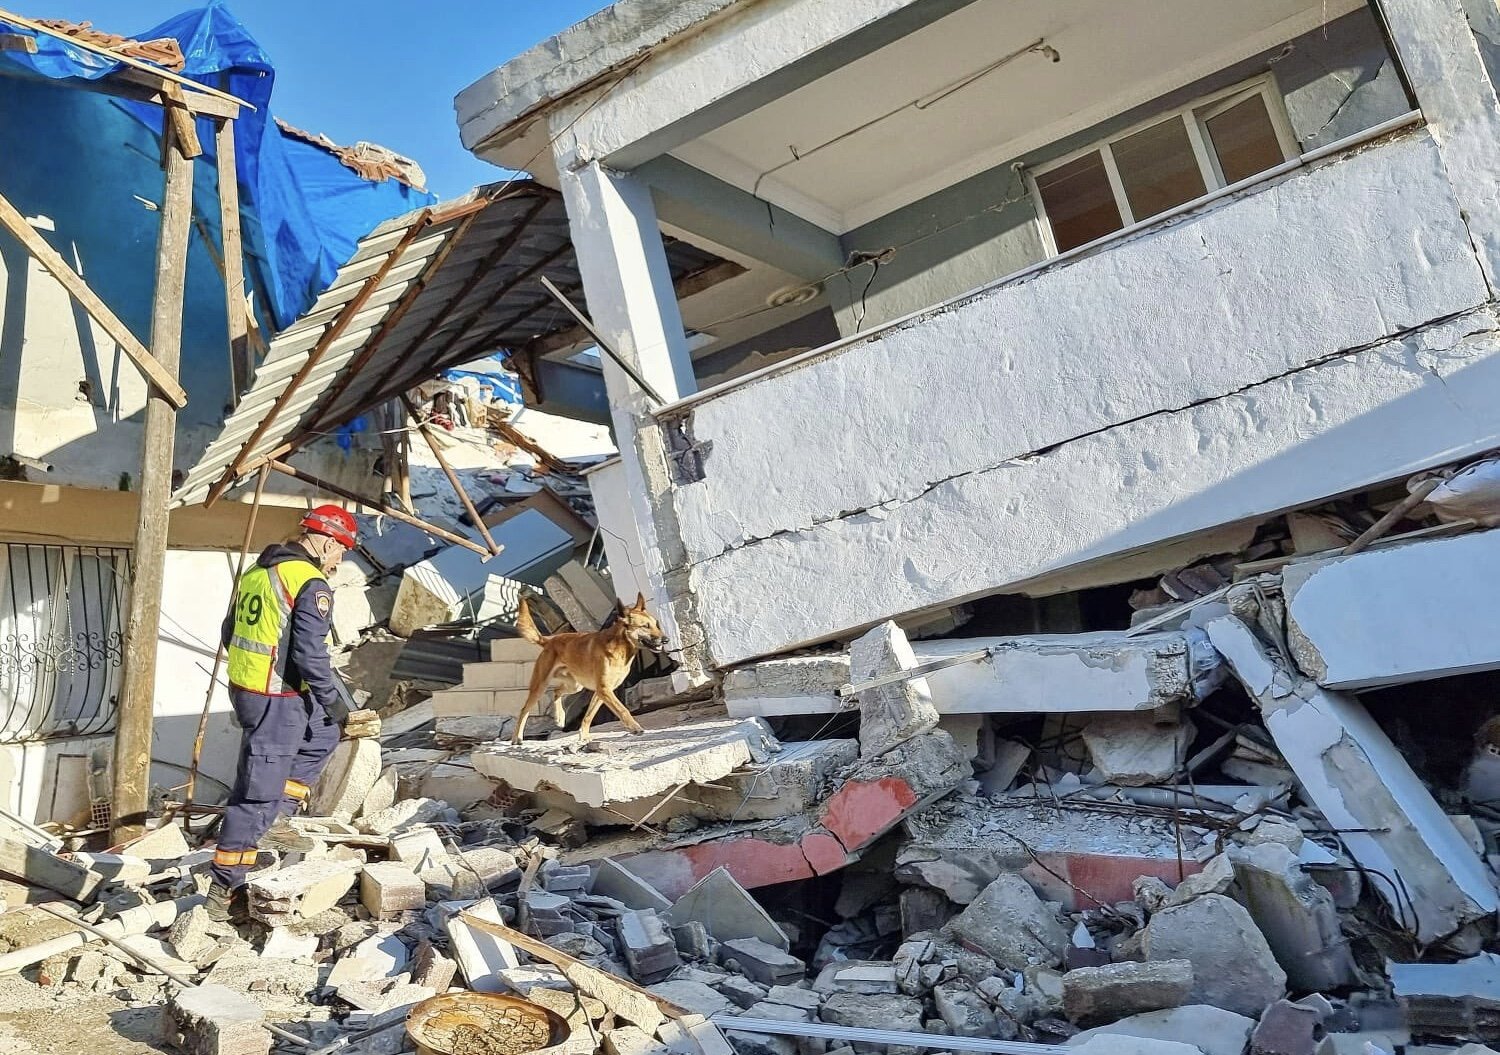 A rescue worker and dog are seen amid the debris following an earthquake in southern Türkiye, Feb. 15, 2023. (Courtesy of the Croatian consulate)